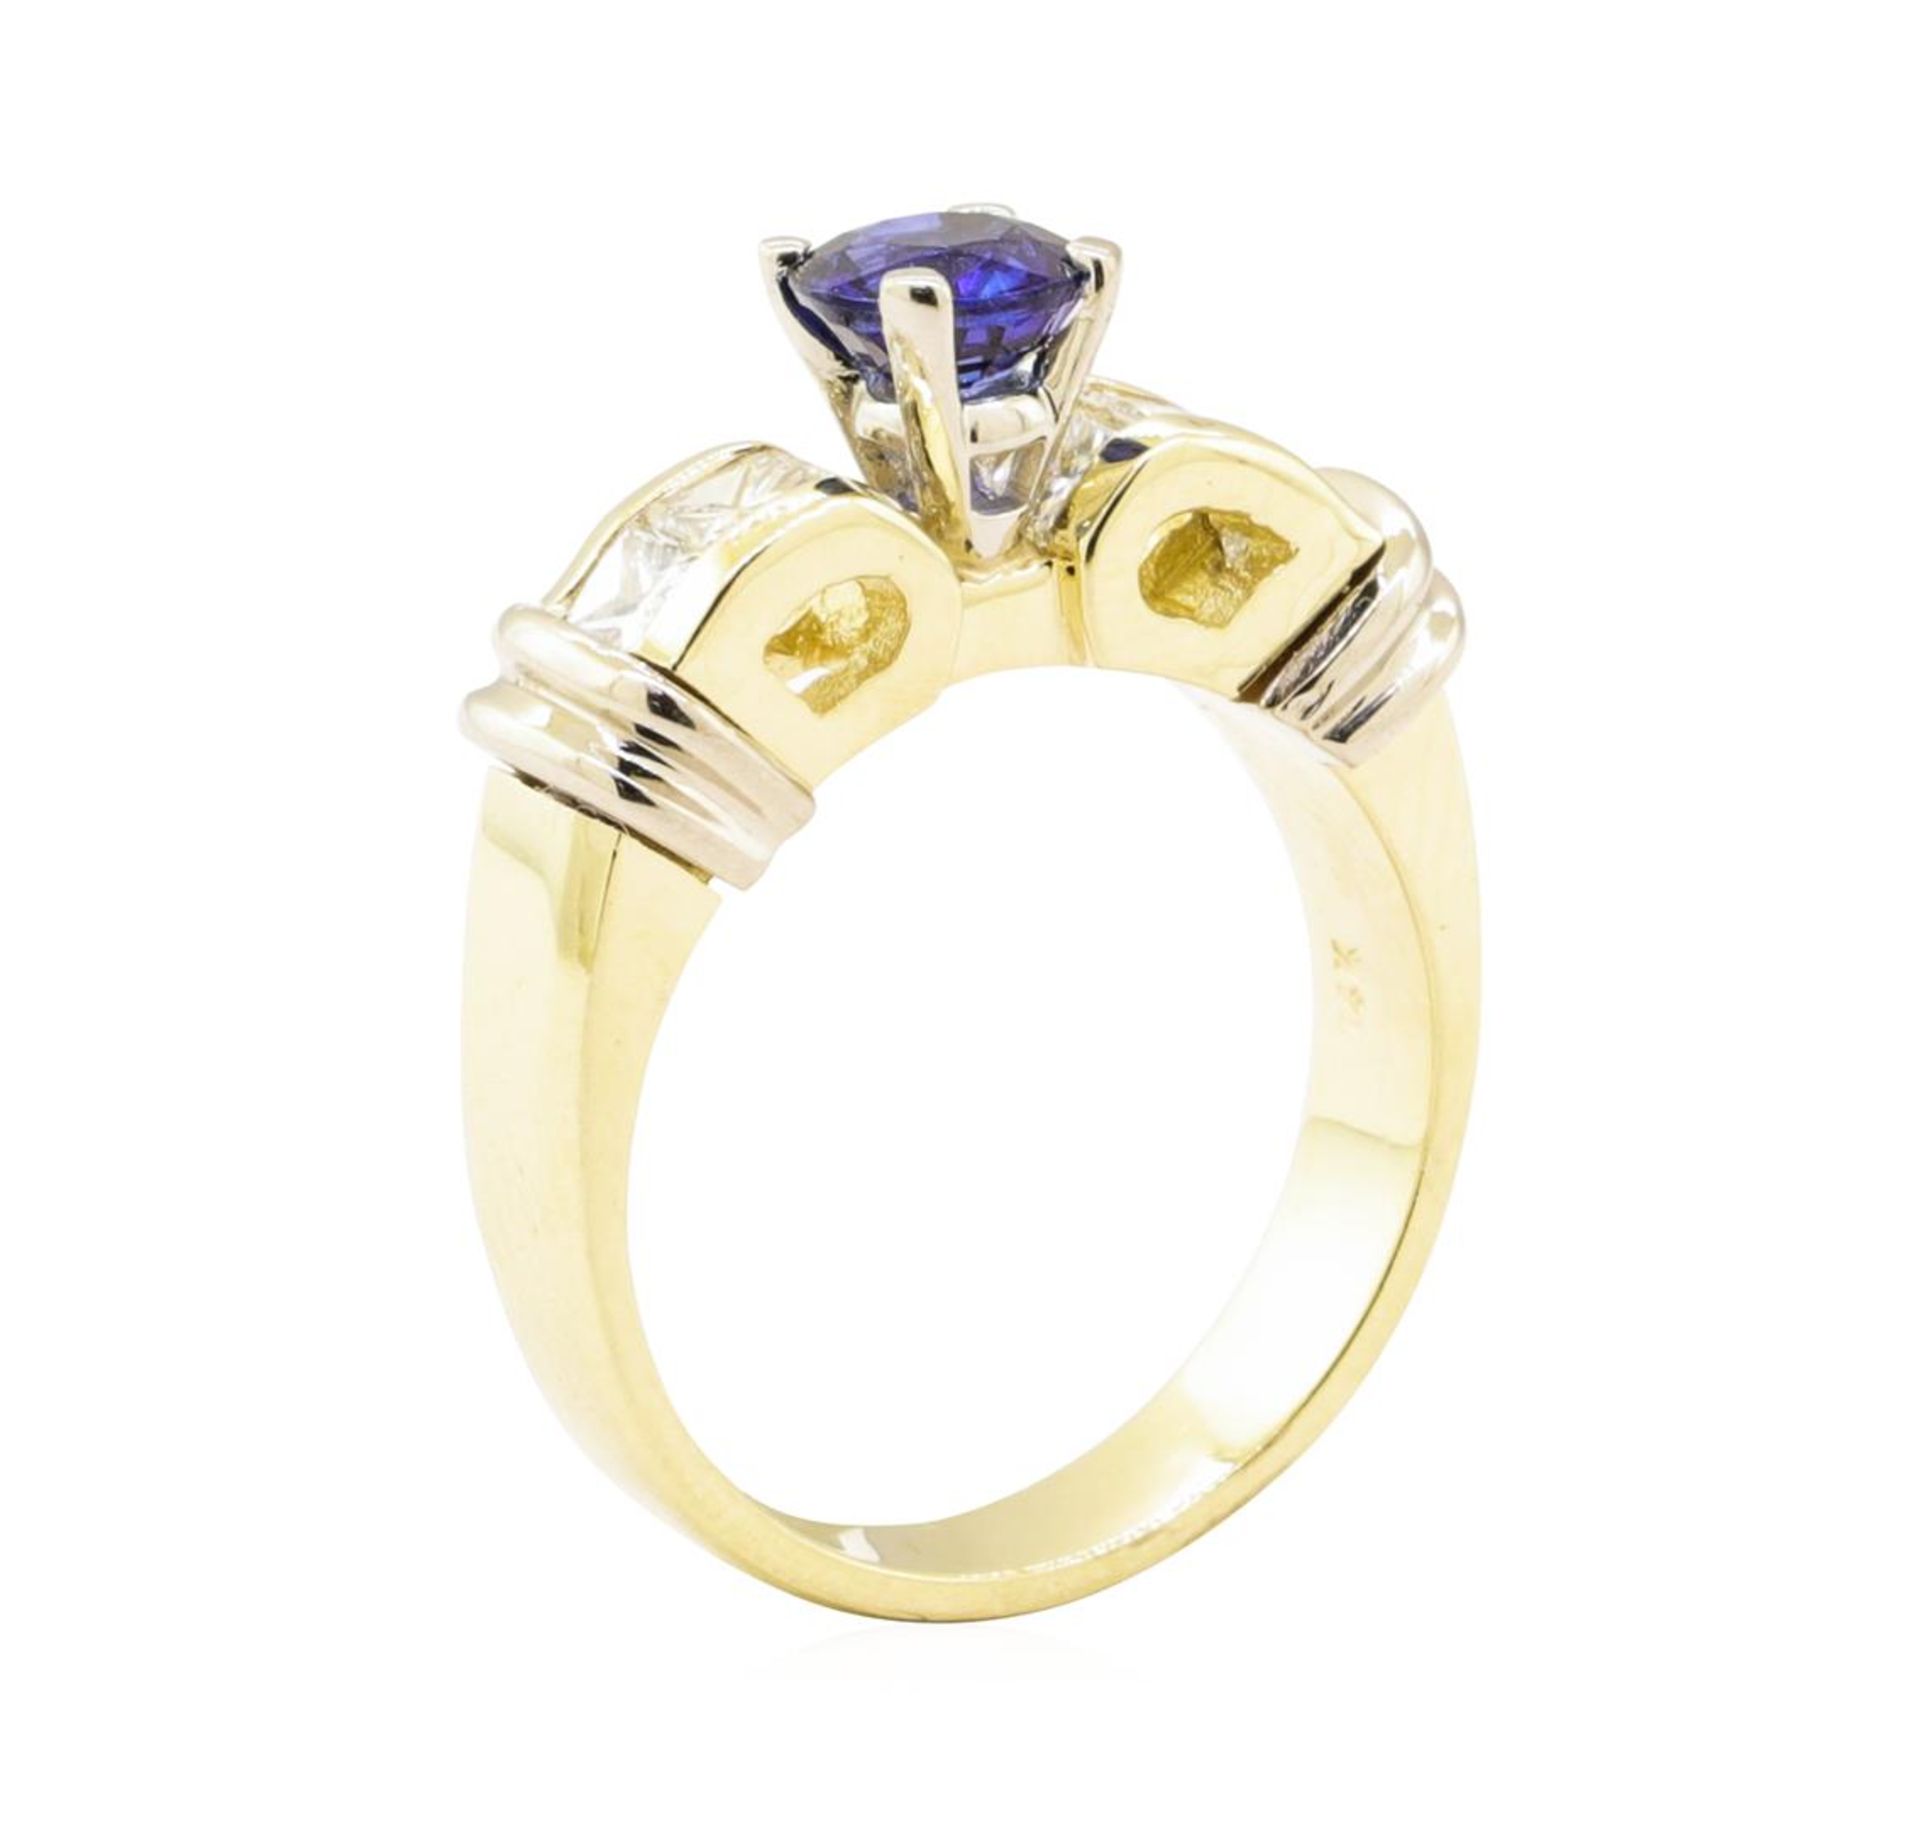 1.67 ctw Blue Sapphire And Diamond Ring - 14KT Yellow And White Gold - Image 4 of 5